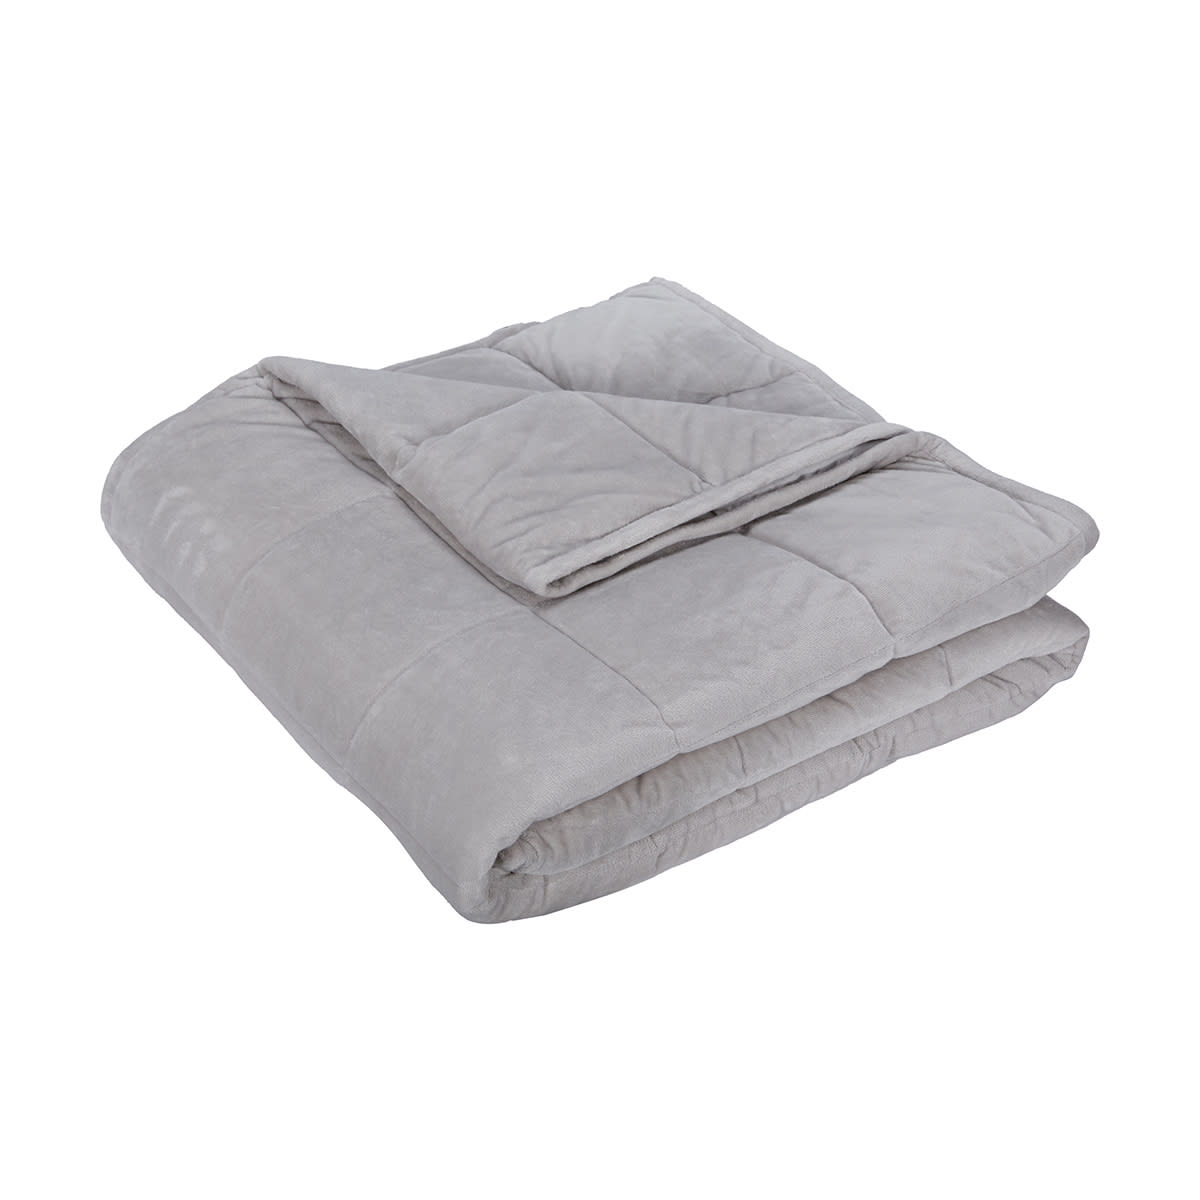 Weighted Blankets Made with Comfort and Cozy Feelings Material Blue and Gray Kids & Adult Weighted Blanket 3lb 36×59Inch 